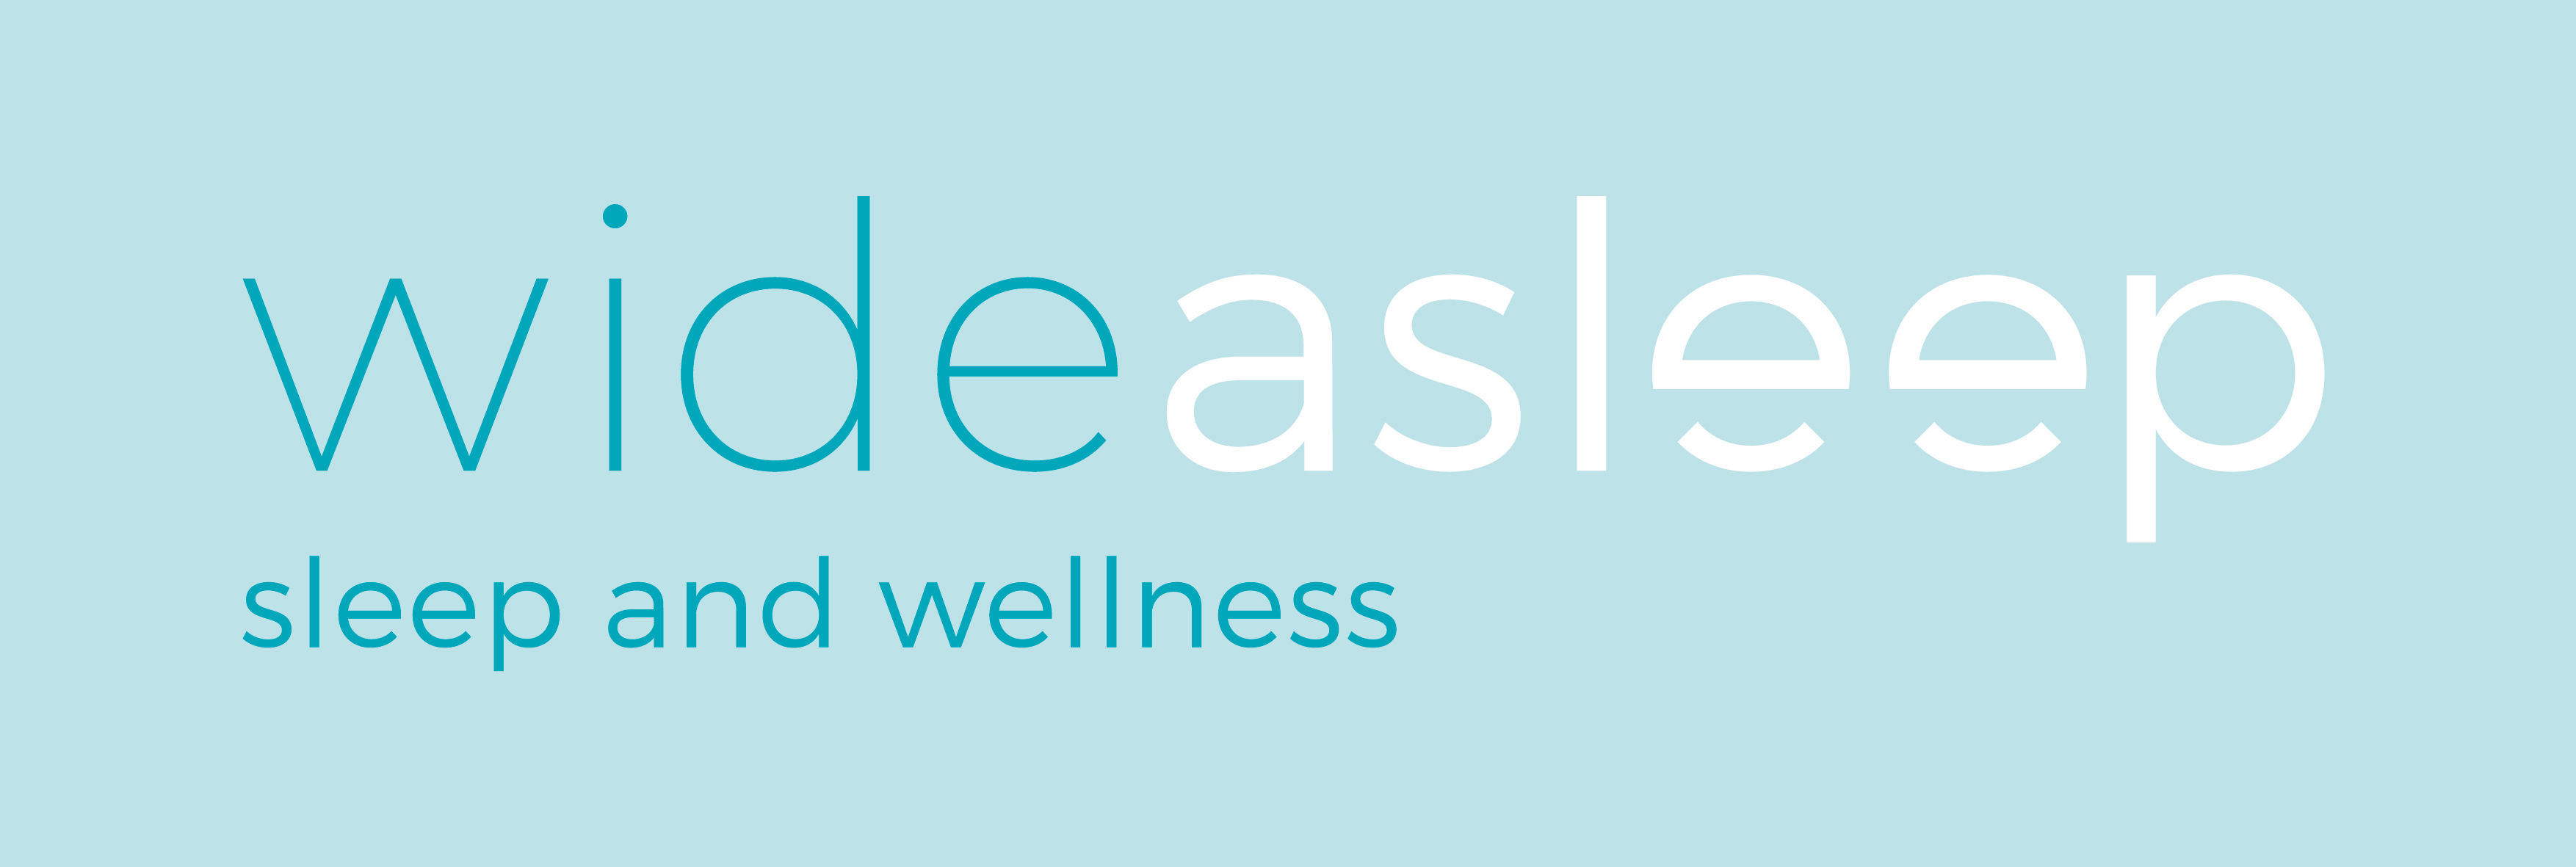 sleep and wellness coaching, Corporate workshops, Hampshire, London and the South